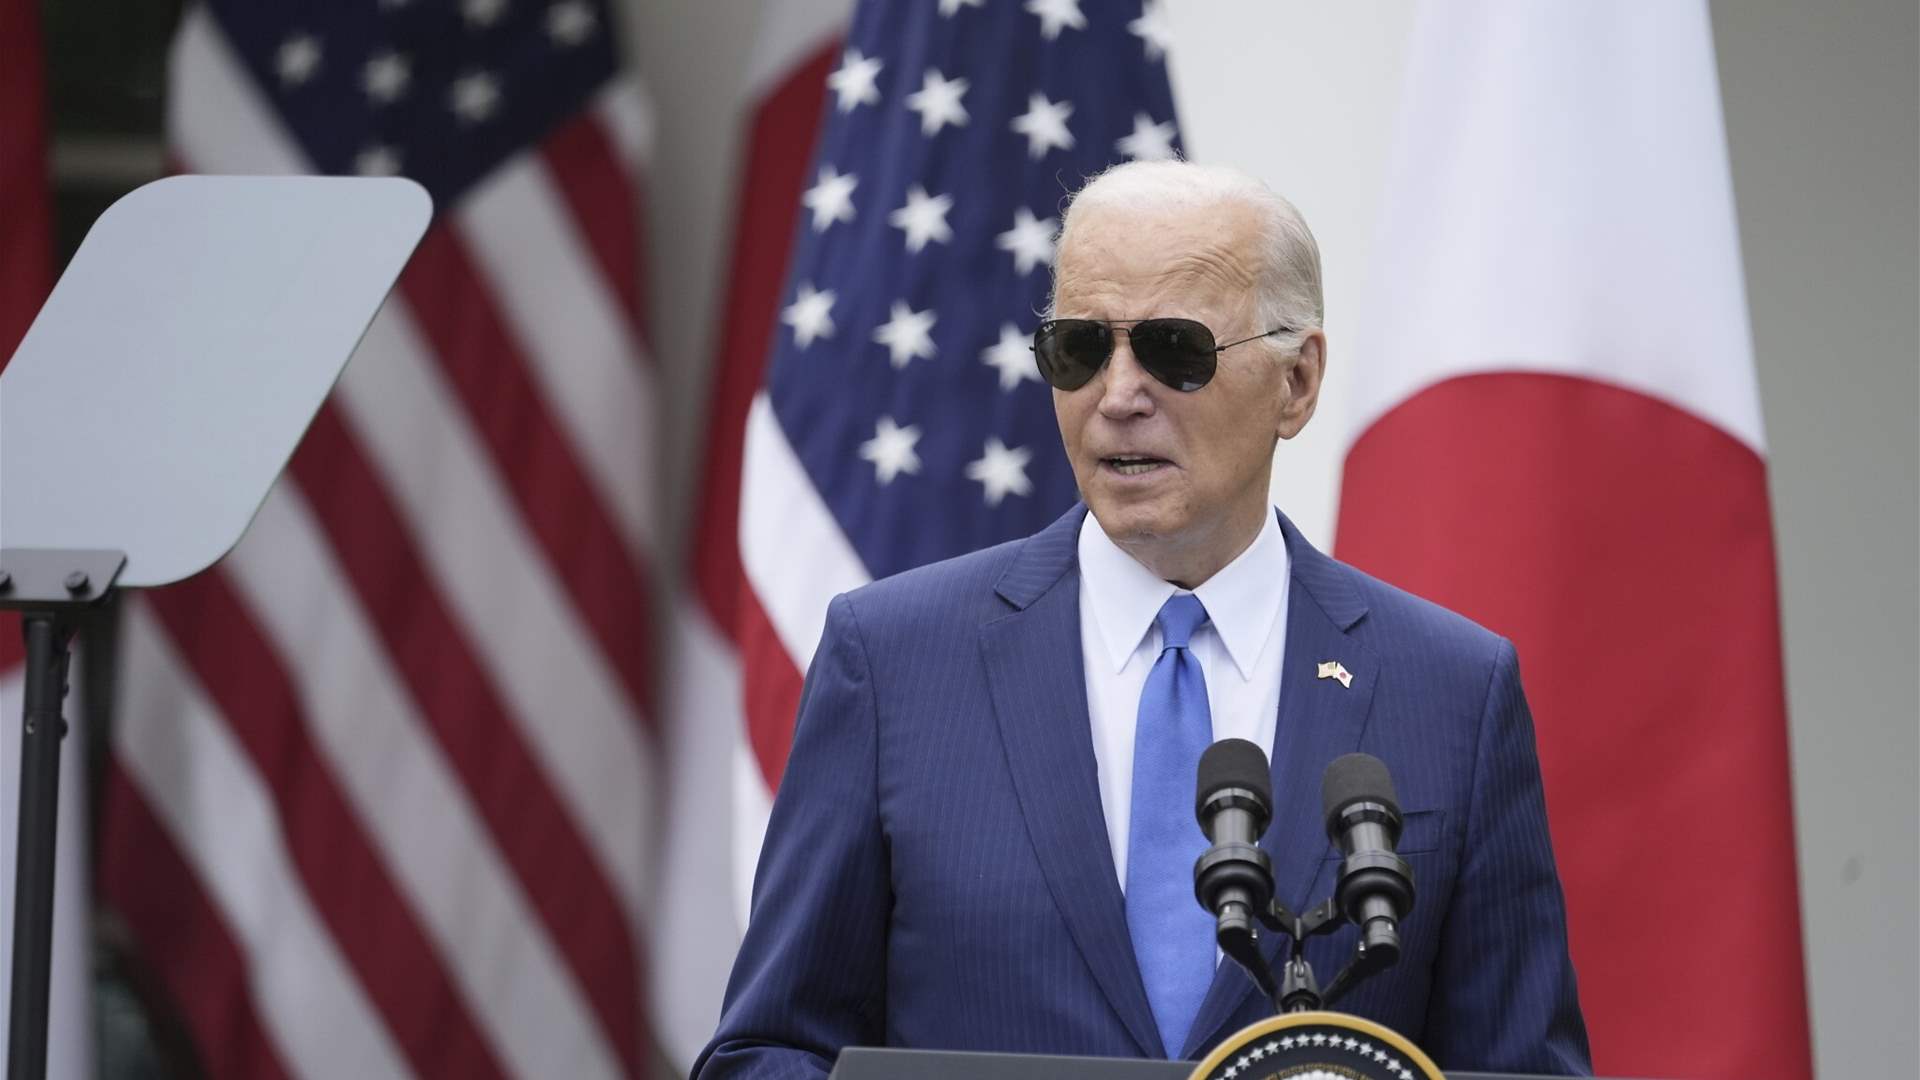 Biden affirms US&#39; commitment to Israel&#39;s security, vows to enforce accountability on Iran with recent sanctions